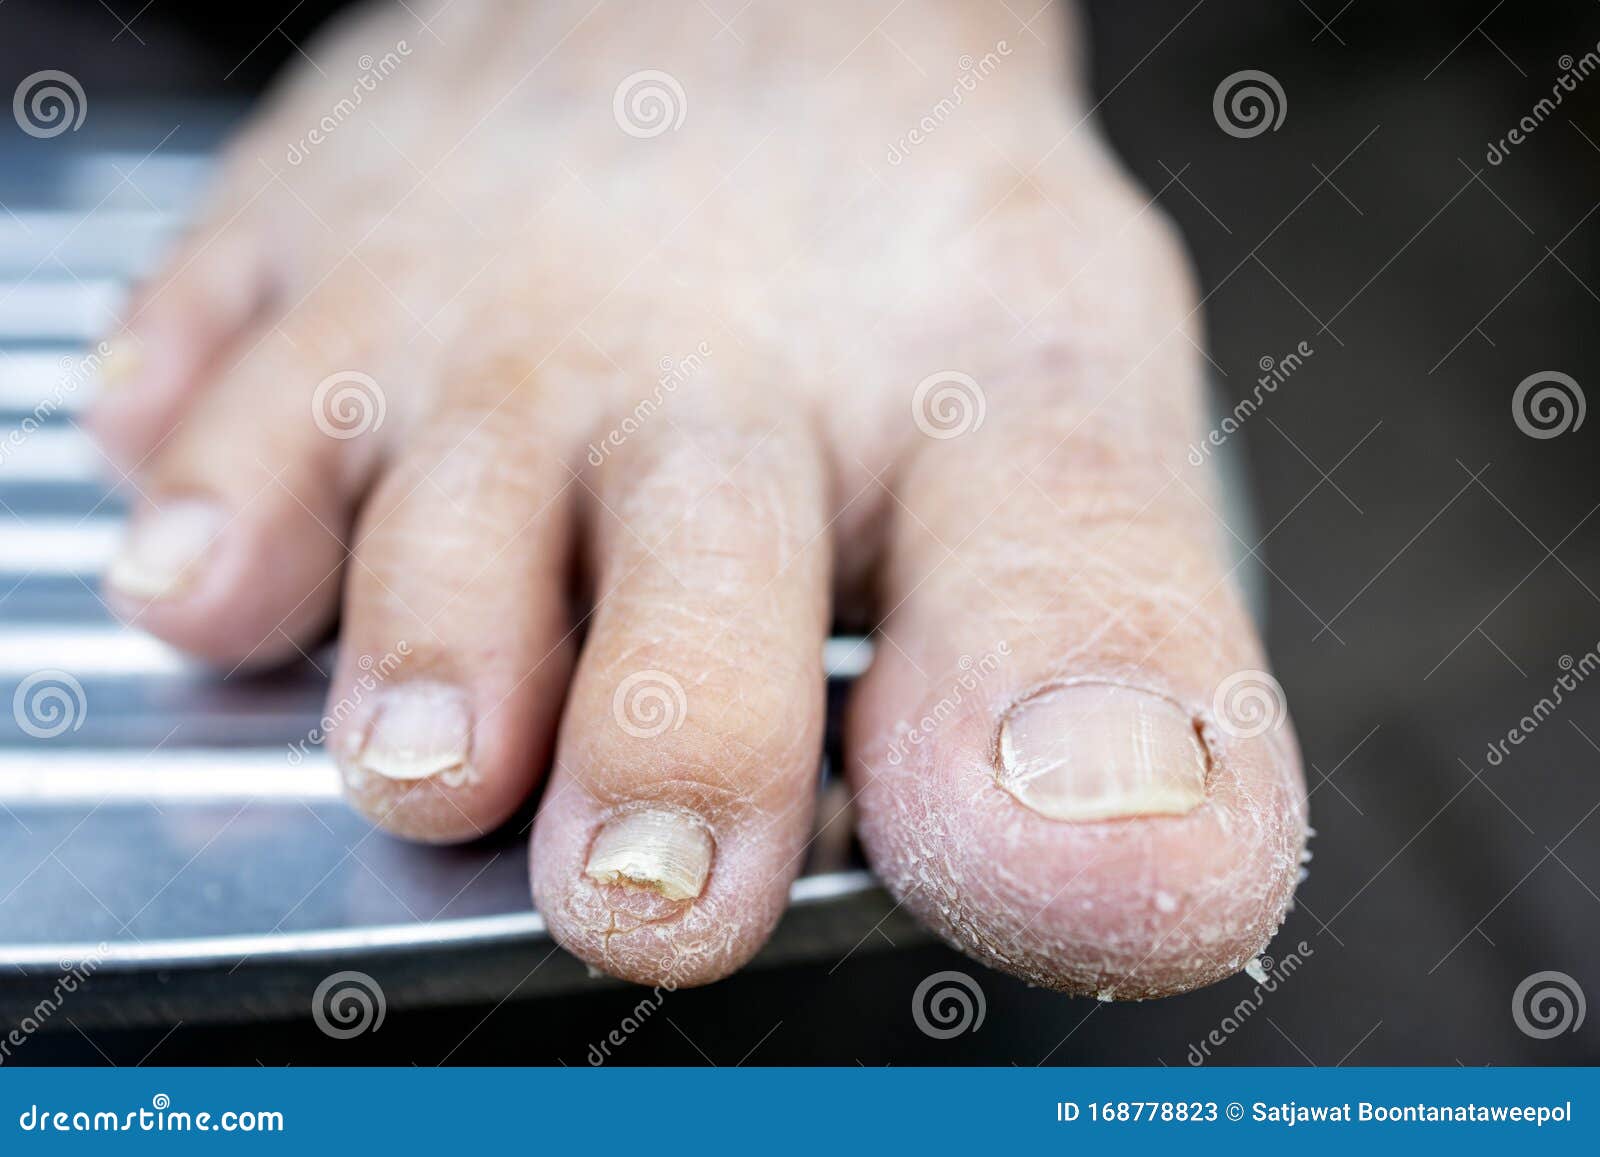 asian senior woman have dry, cracked feet and broken nails in the elderly,old people dry skin, lack of nourishment, lack of